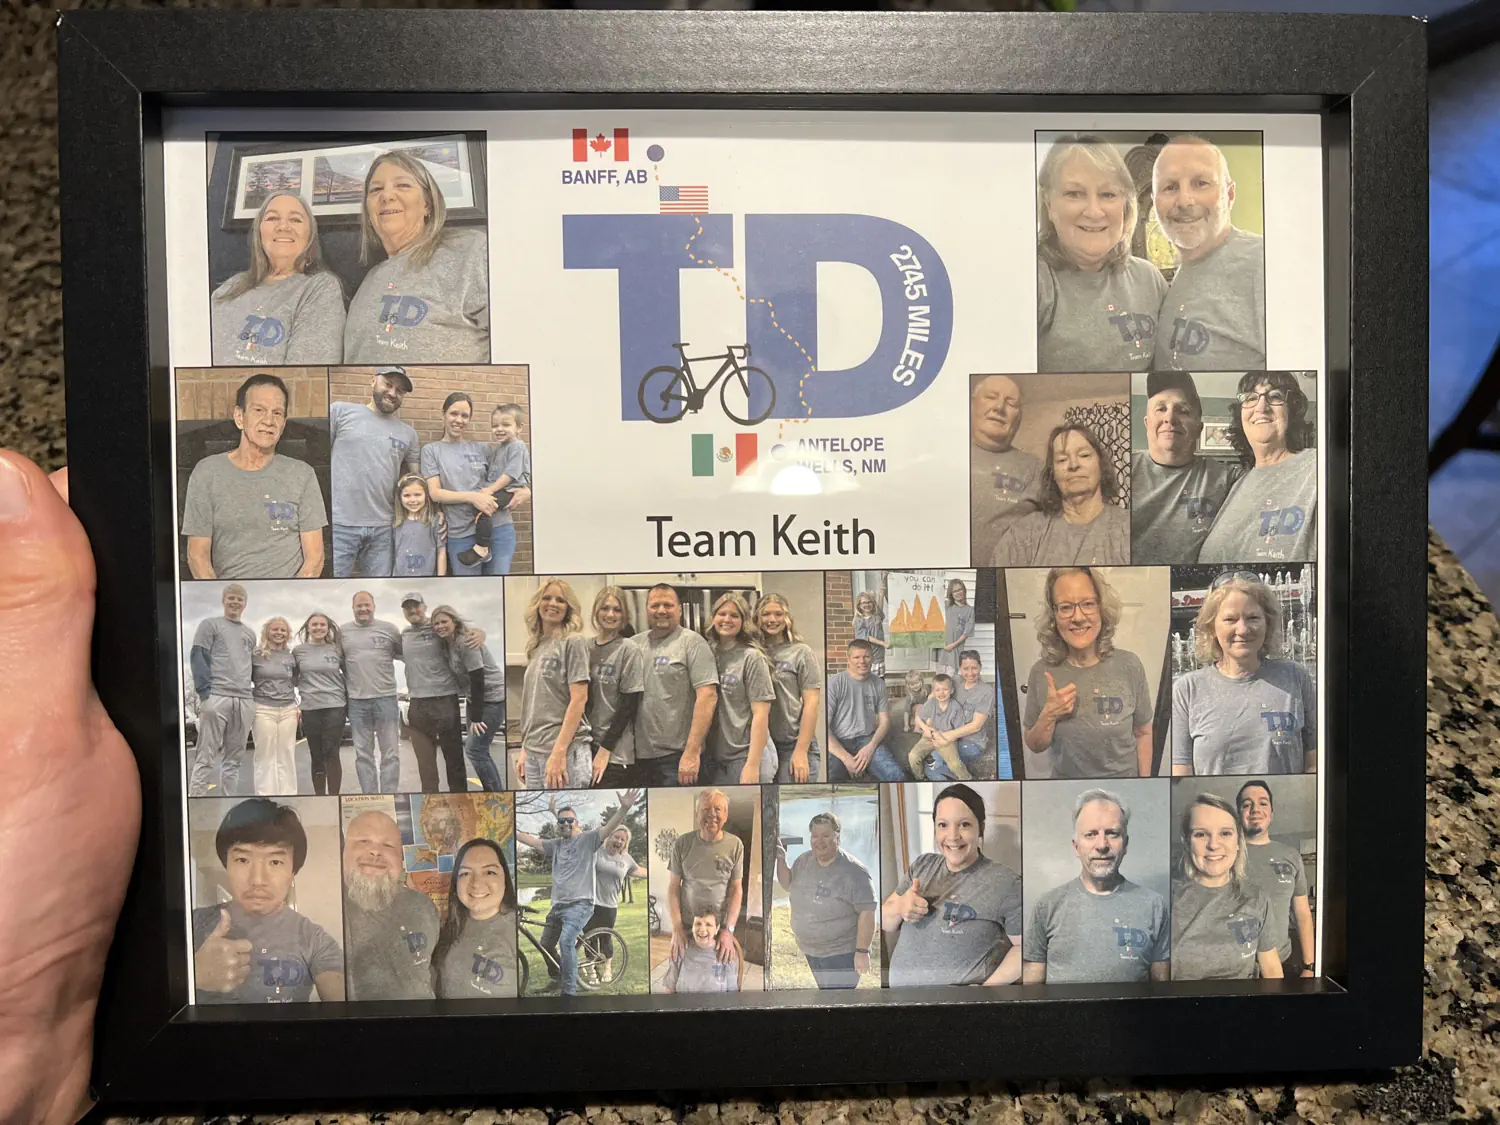 A photo collage of Keith's friends and family all wearing "Team Keith" shirts